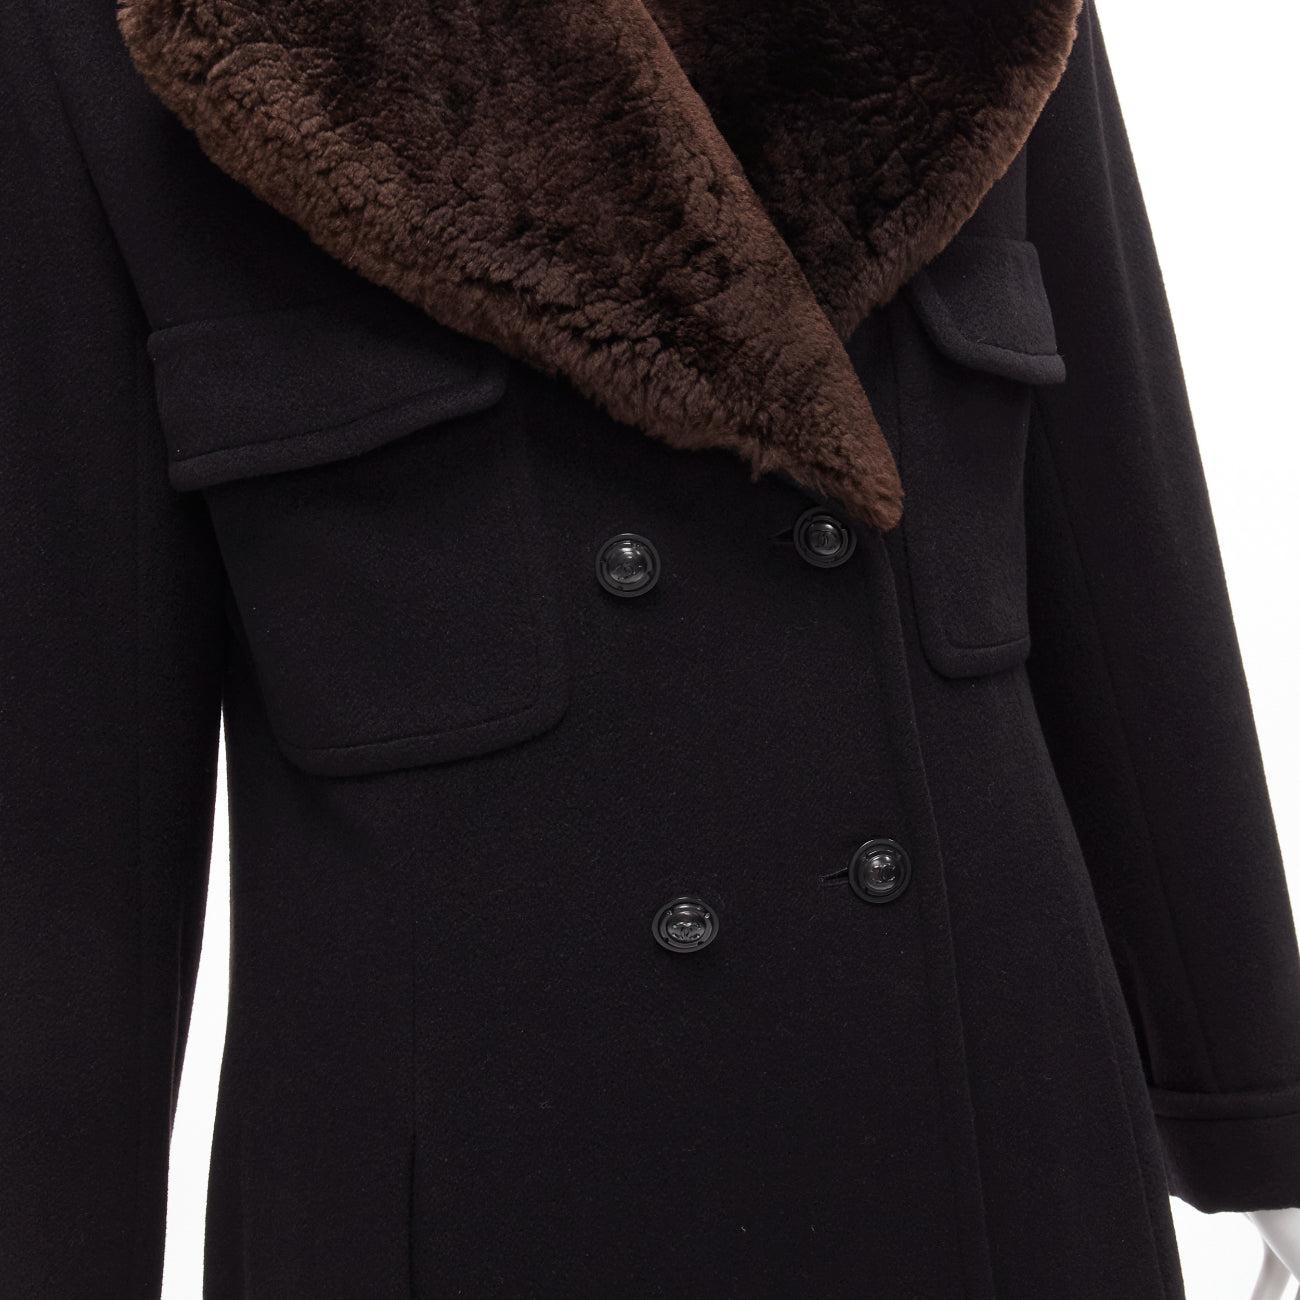 CHANEL Vintage 97A 100% cashmere brown fur collar A-line coat FR38 M
Reference: CC/A00388
Brand: Chanel
Designer: Karl Lagerfeld
Collection: 97A
Material: Cashmere, Fur
Color: Black, Brown
Pattern: Solid
Closure: Button
Lining: Burgundy Silk
Extra